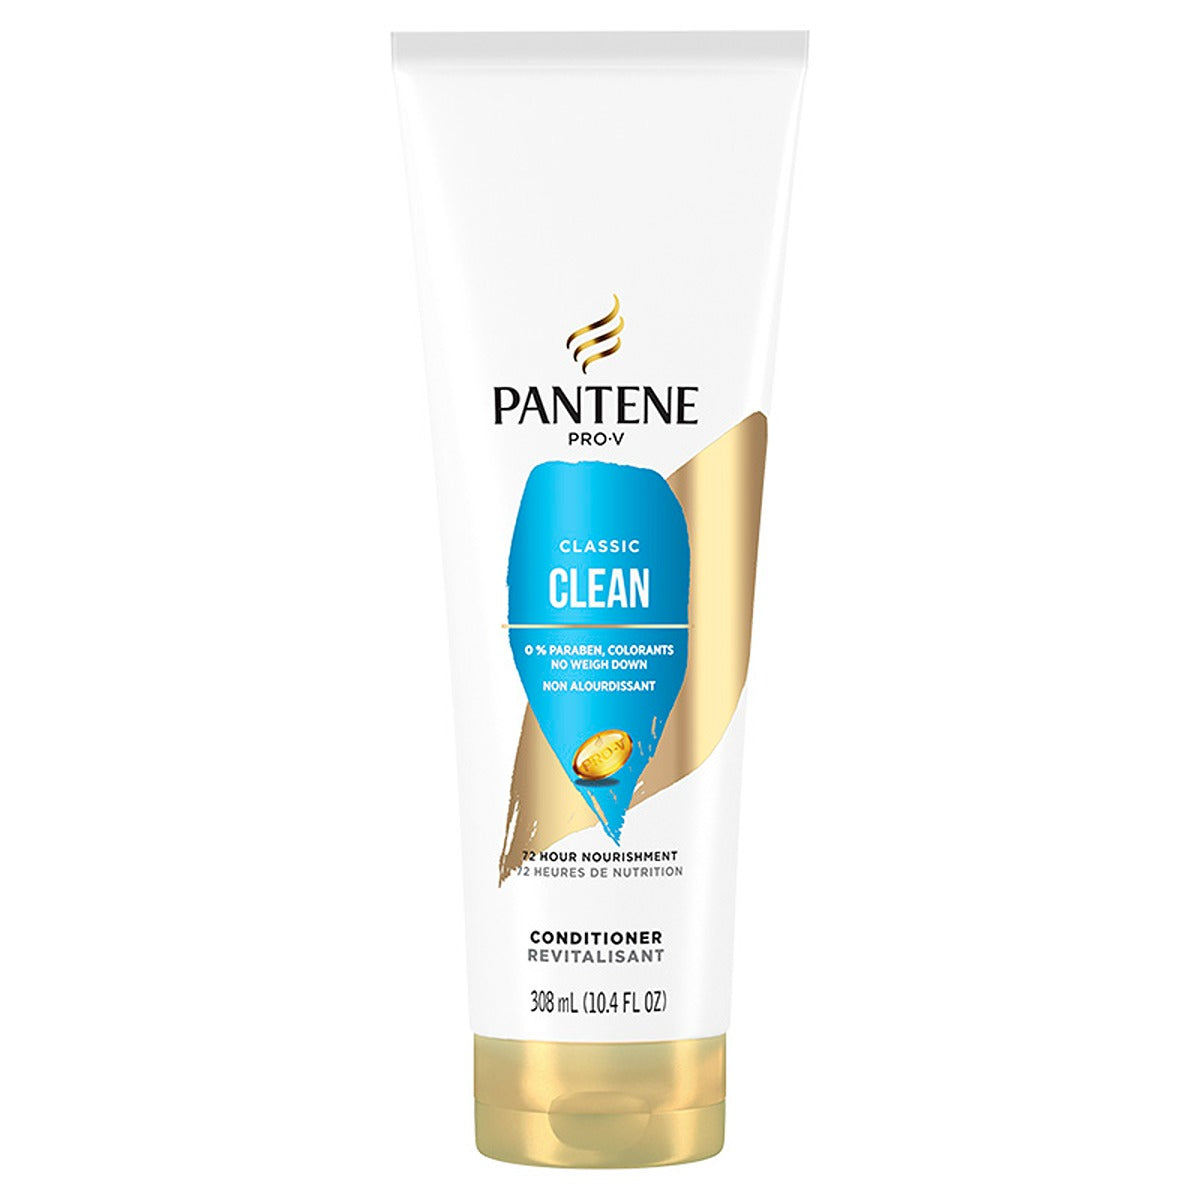 Pantene - Classic Clean Conditioner & Shampoo - 270ml - Continental Food Store